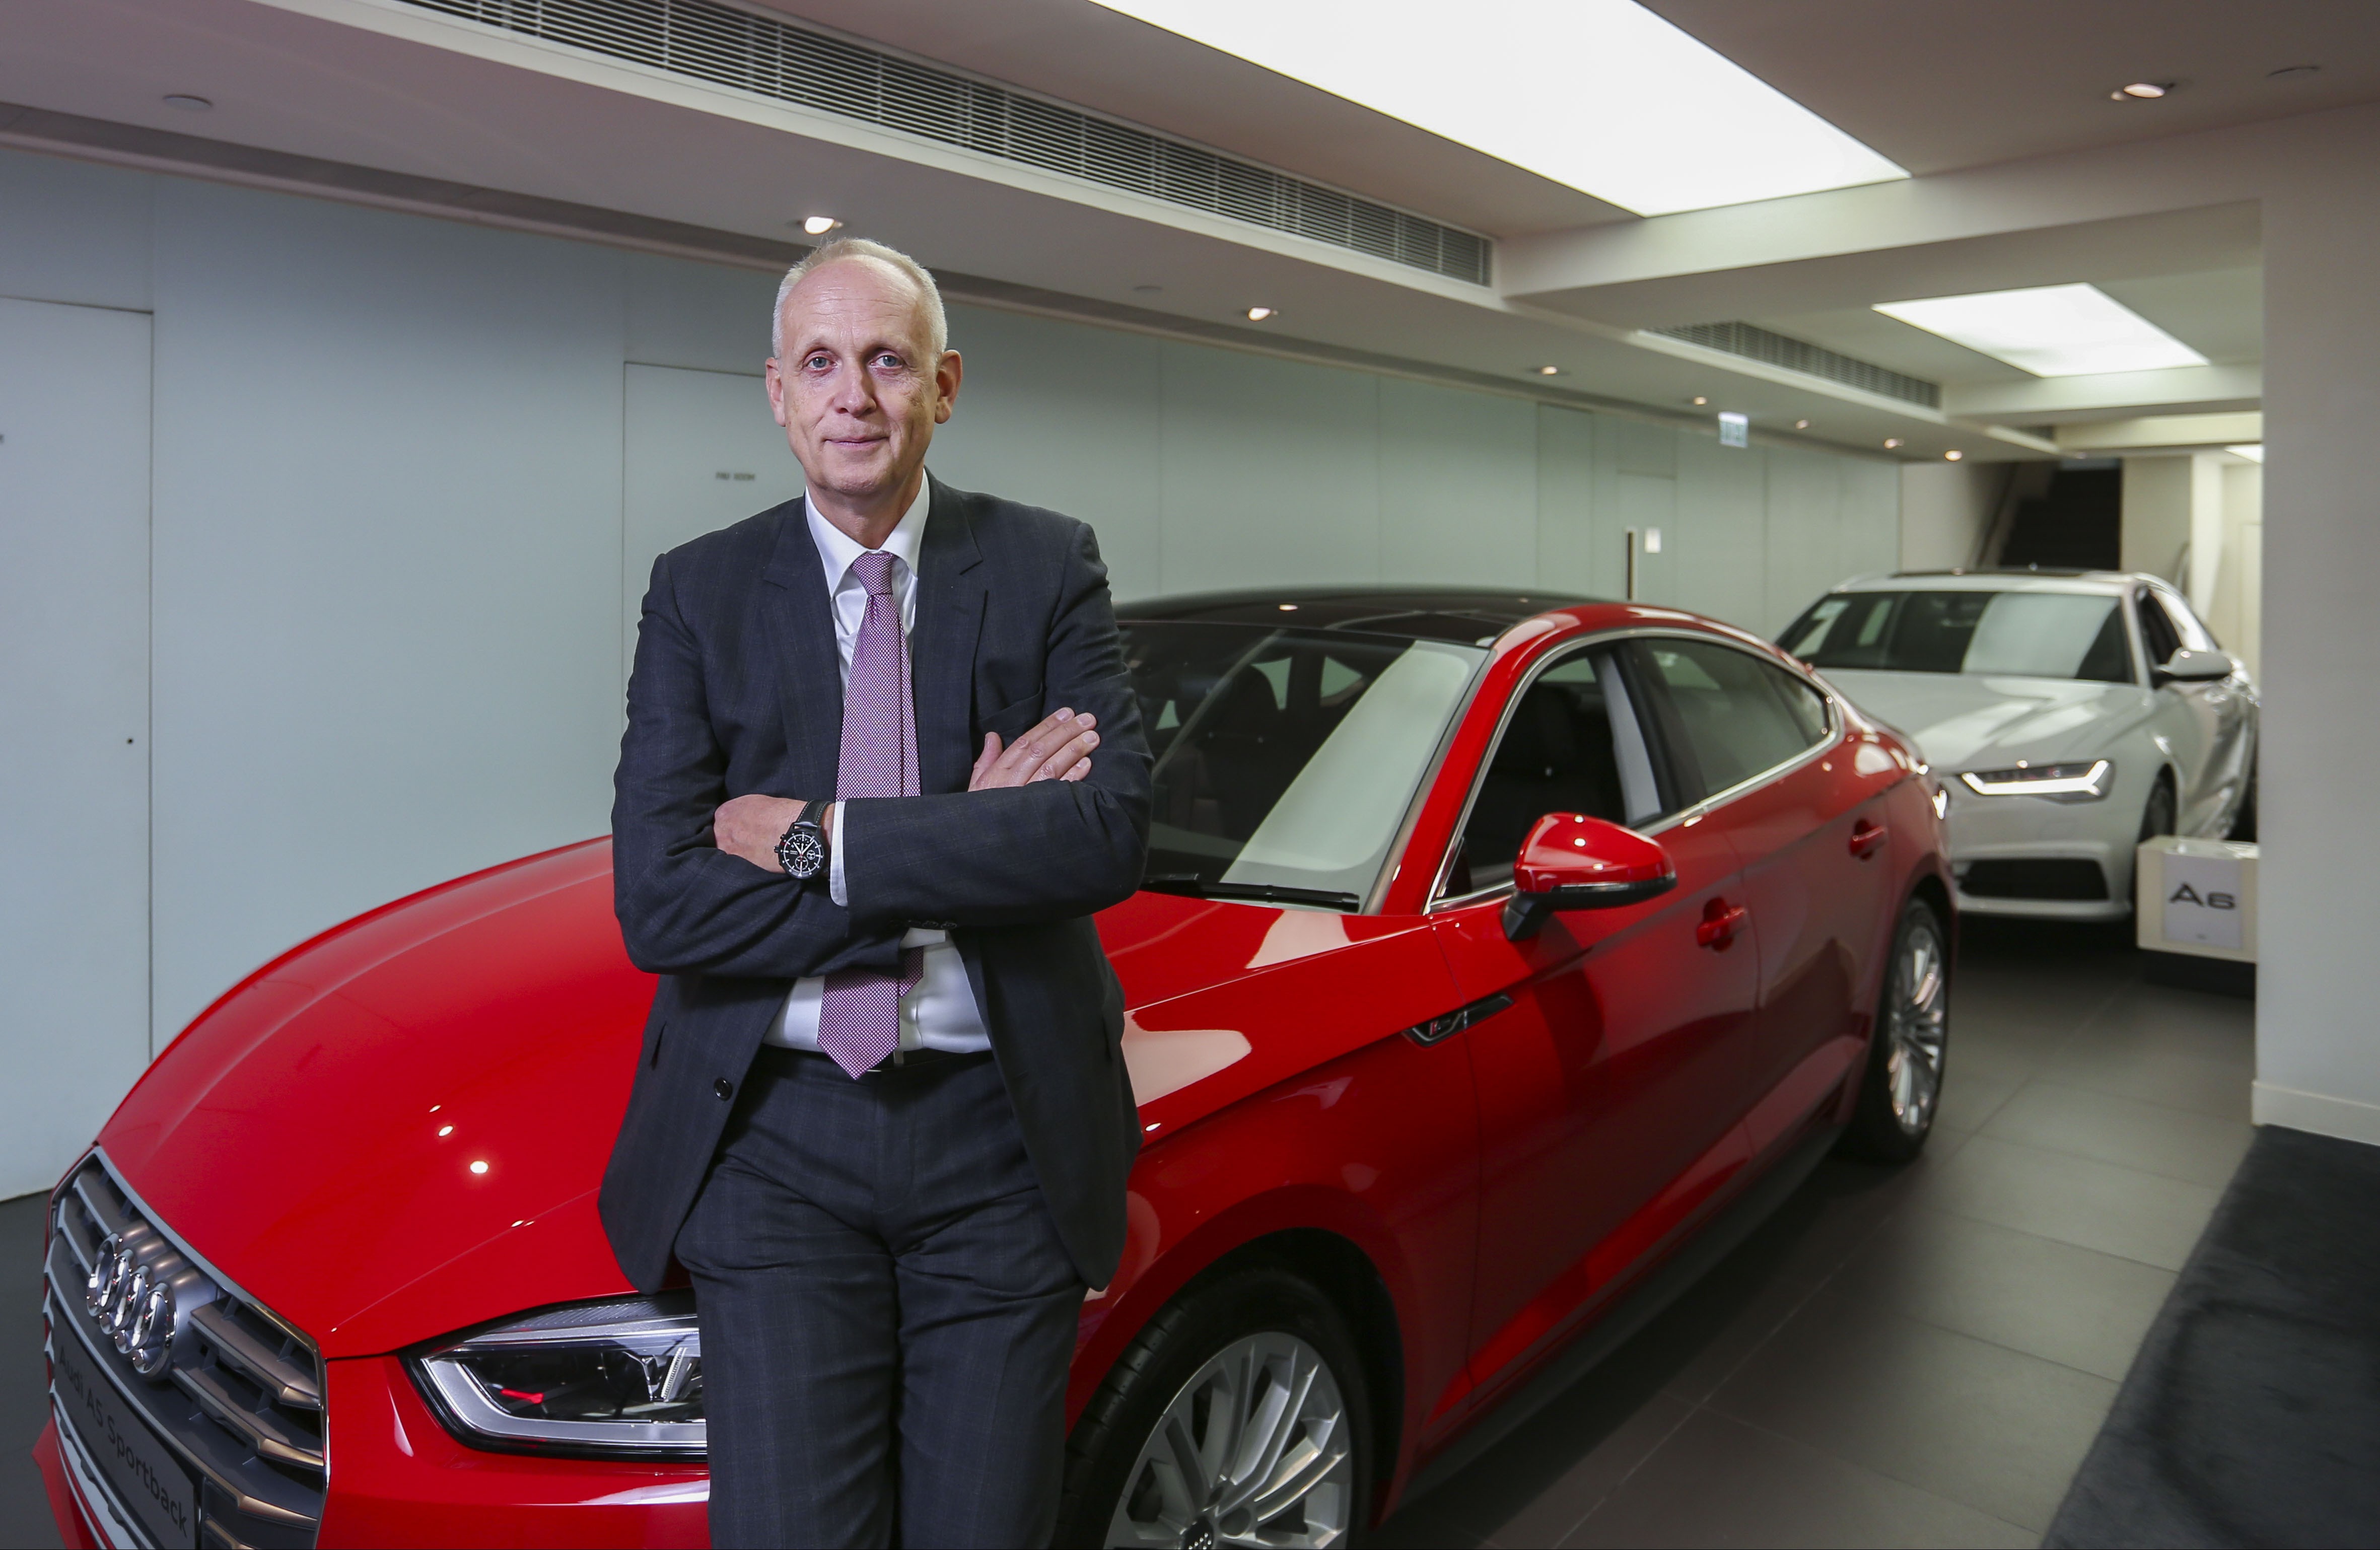 Audi managing director Lothar Korn said it was the first time the luxury carmaker had collaborated with Operation Santa Claus and was looking forward to taking part in more charitable efforts in the coming future. Photo: Xiaomei Chen